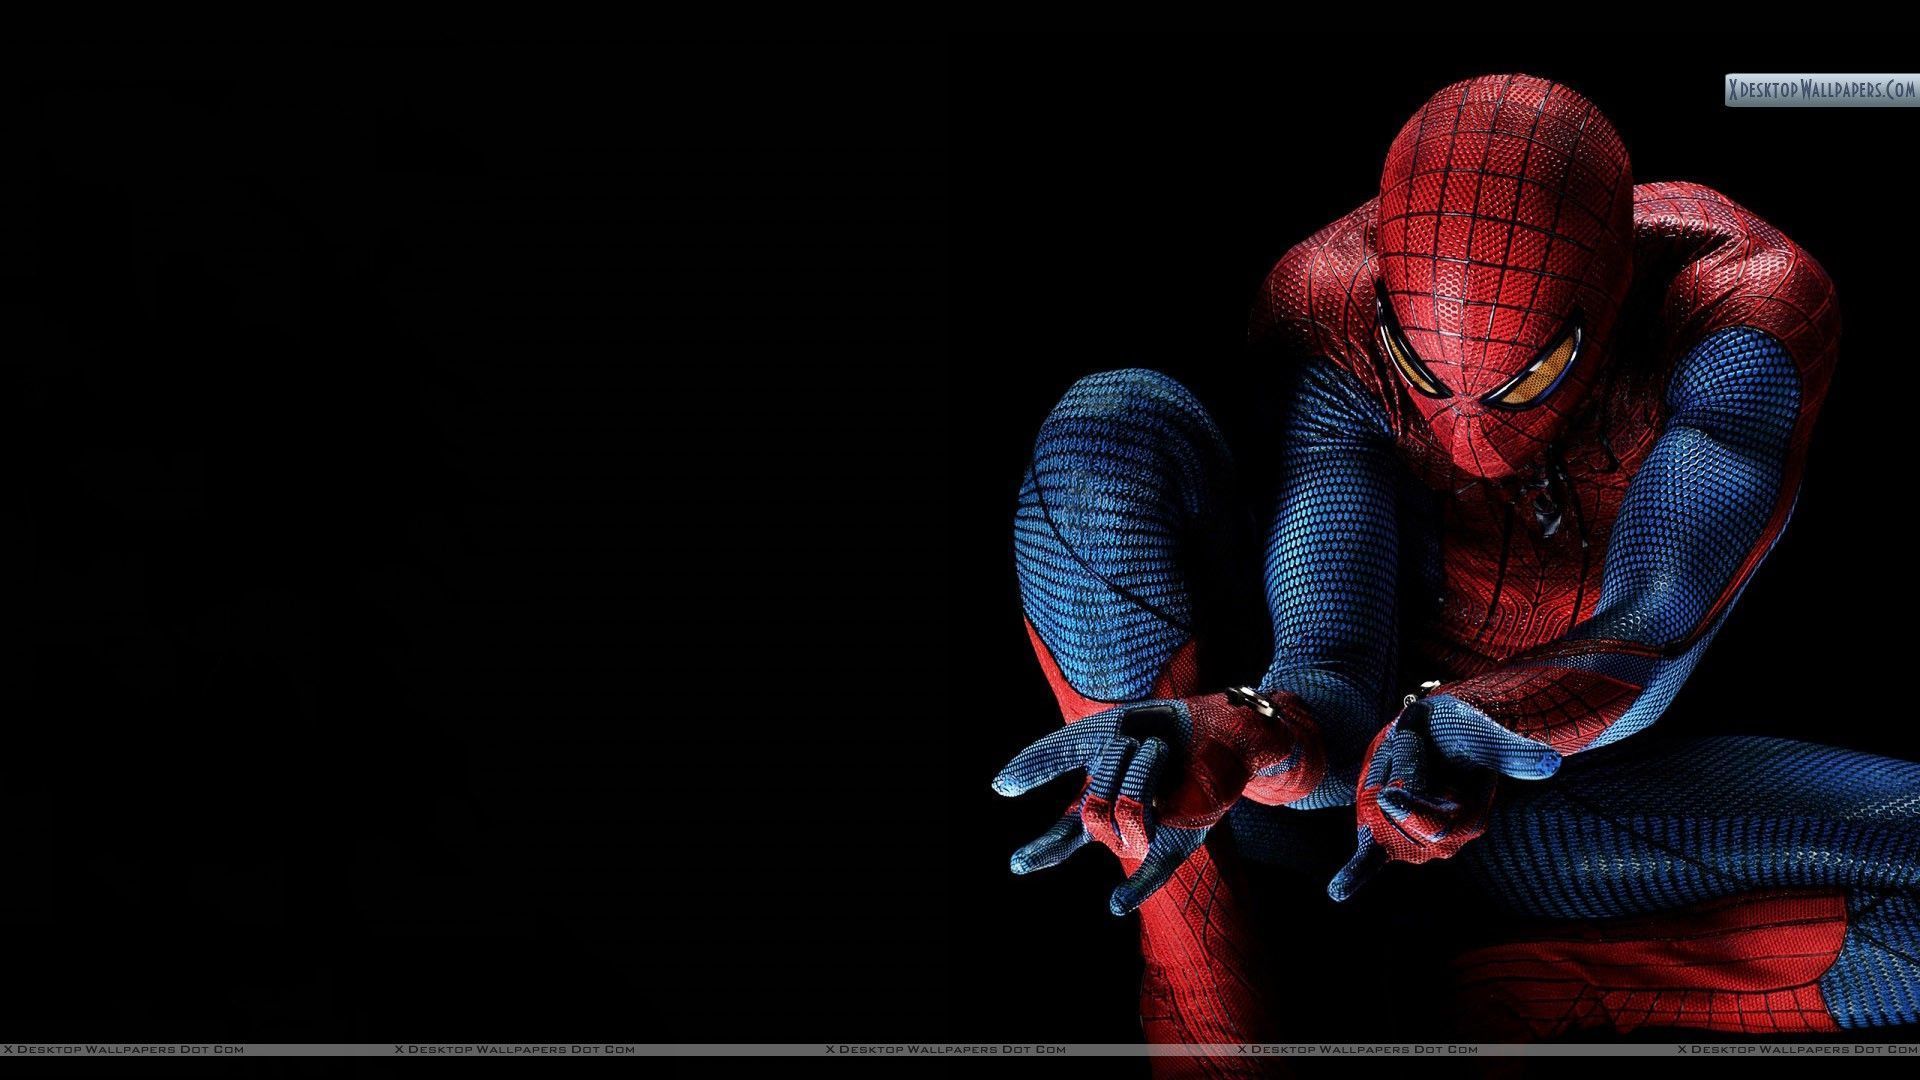 The Amazing Spider-Man Wallpapers, Photos & Images in HD